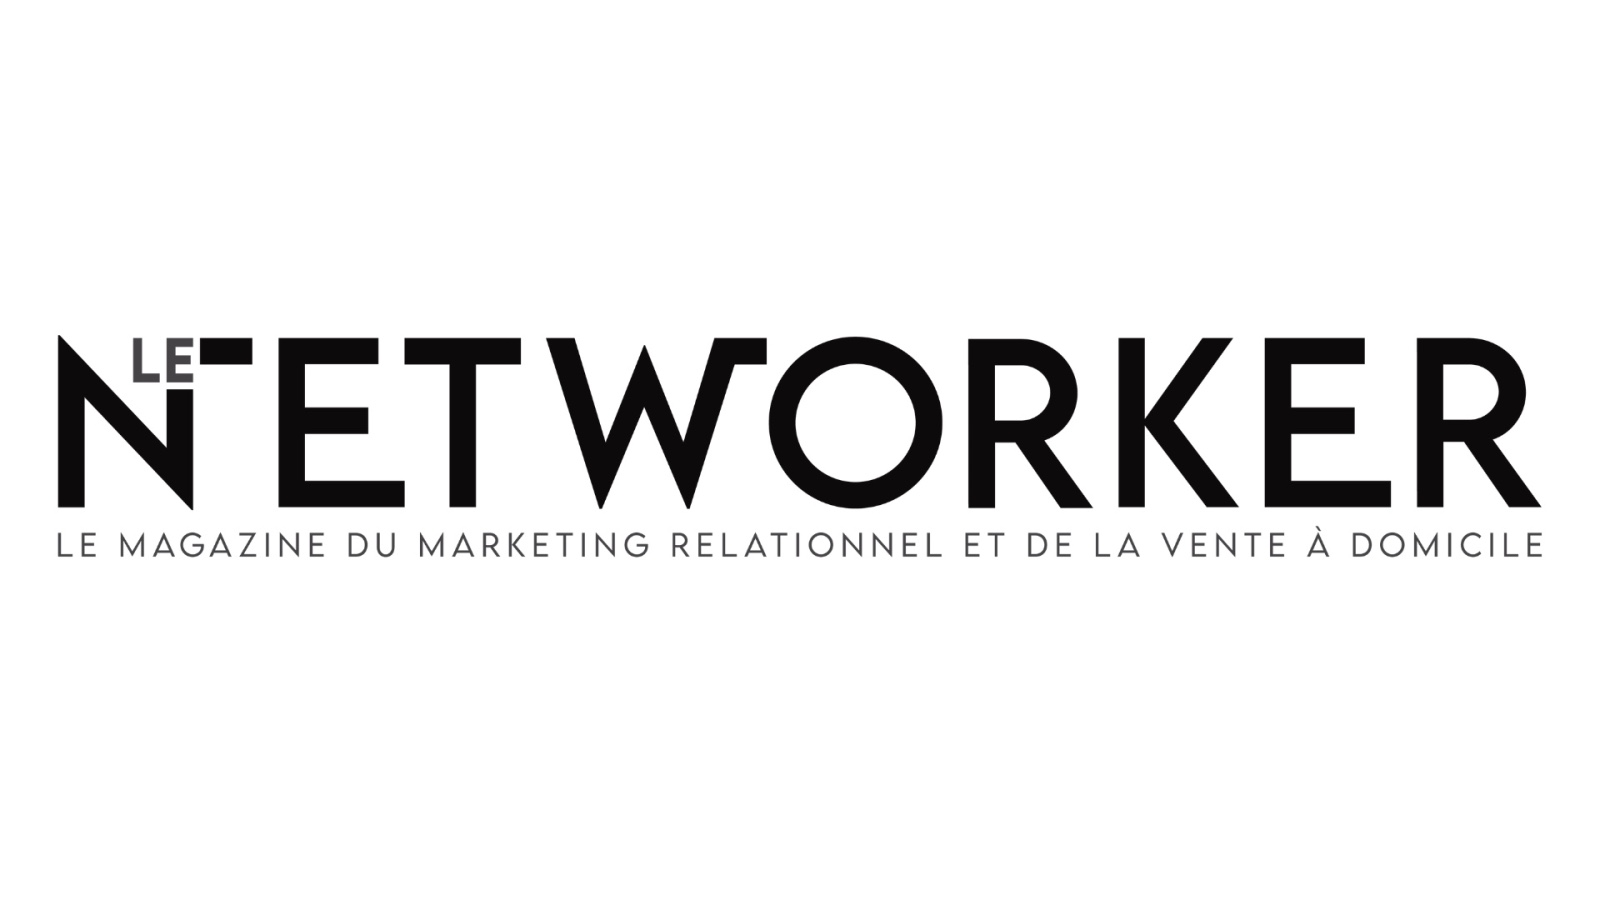 LE NETWORKER